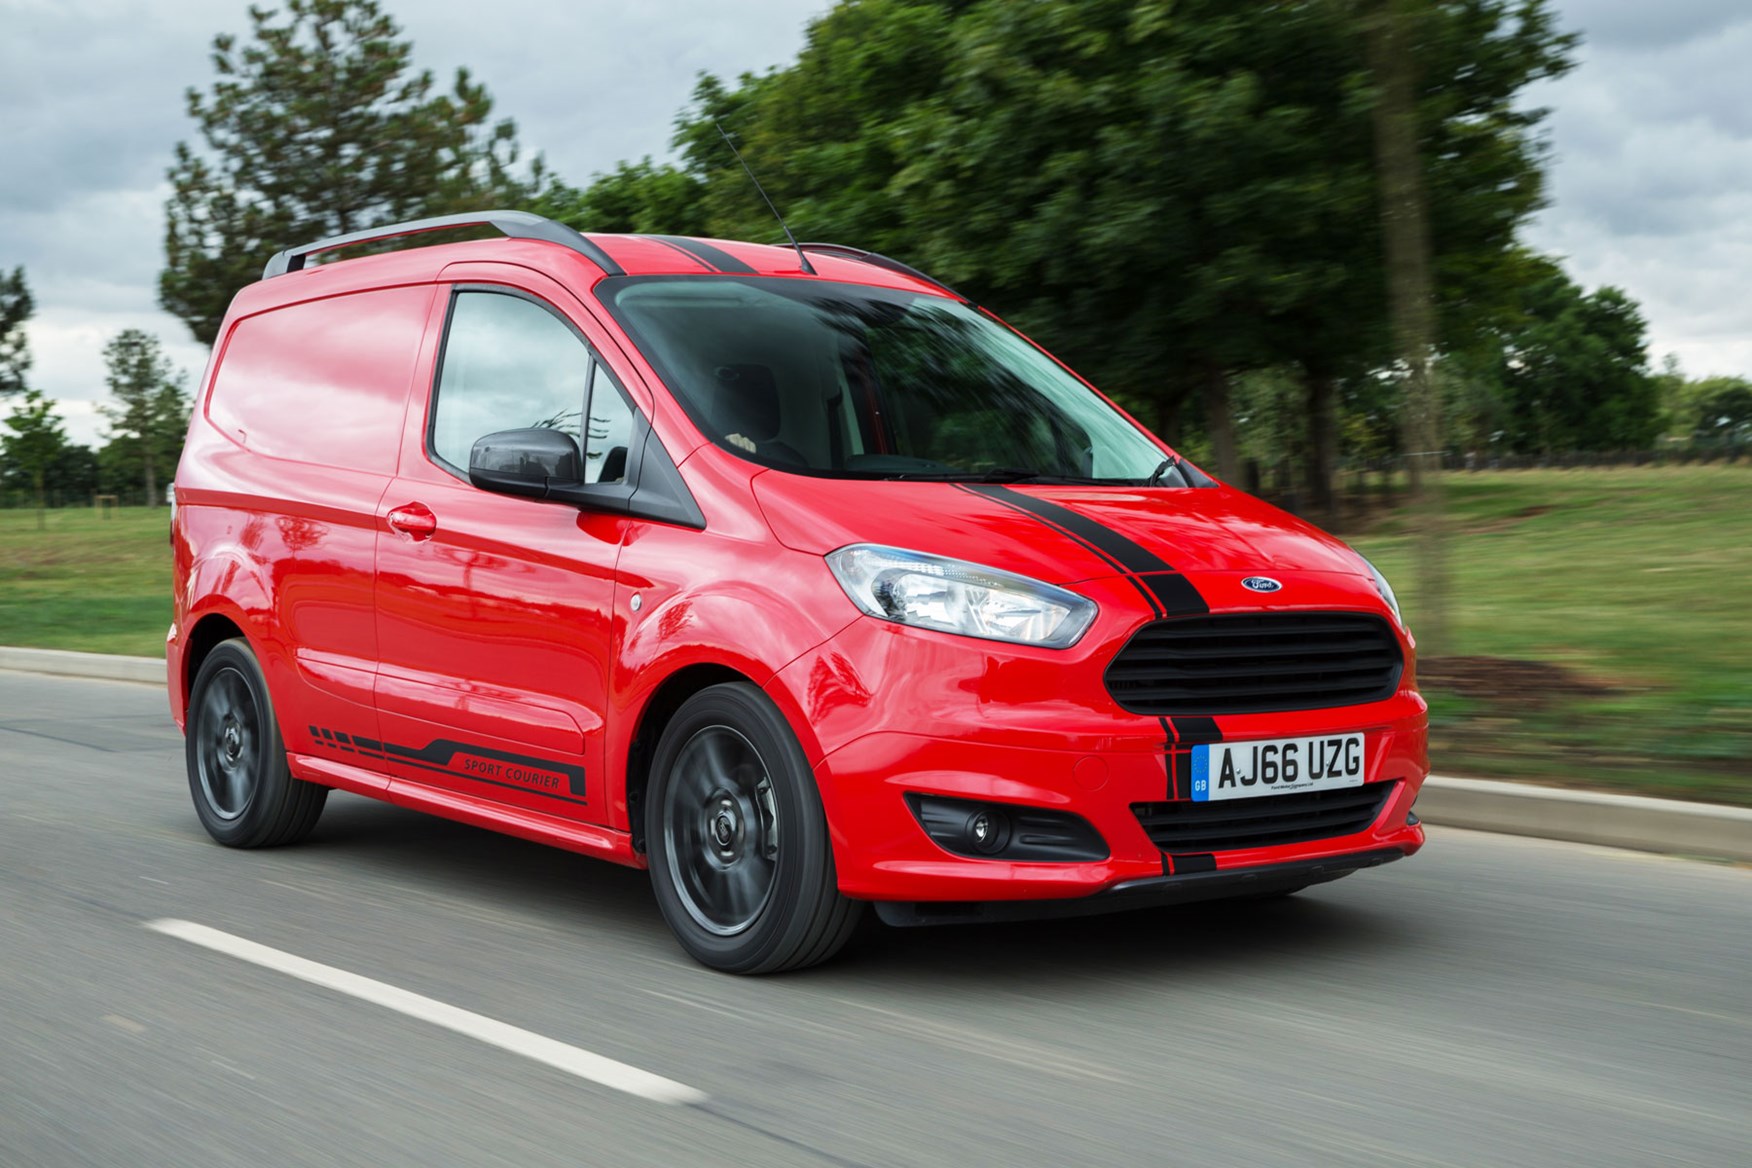 Ford Transit Courier Sport, 2017 model, front view, red, driving